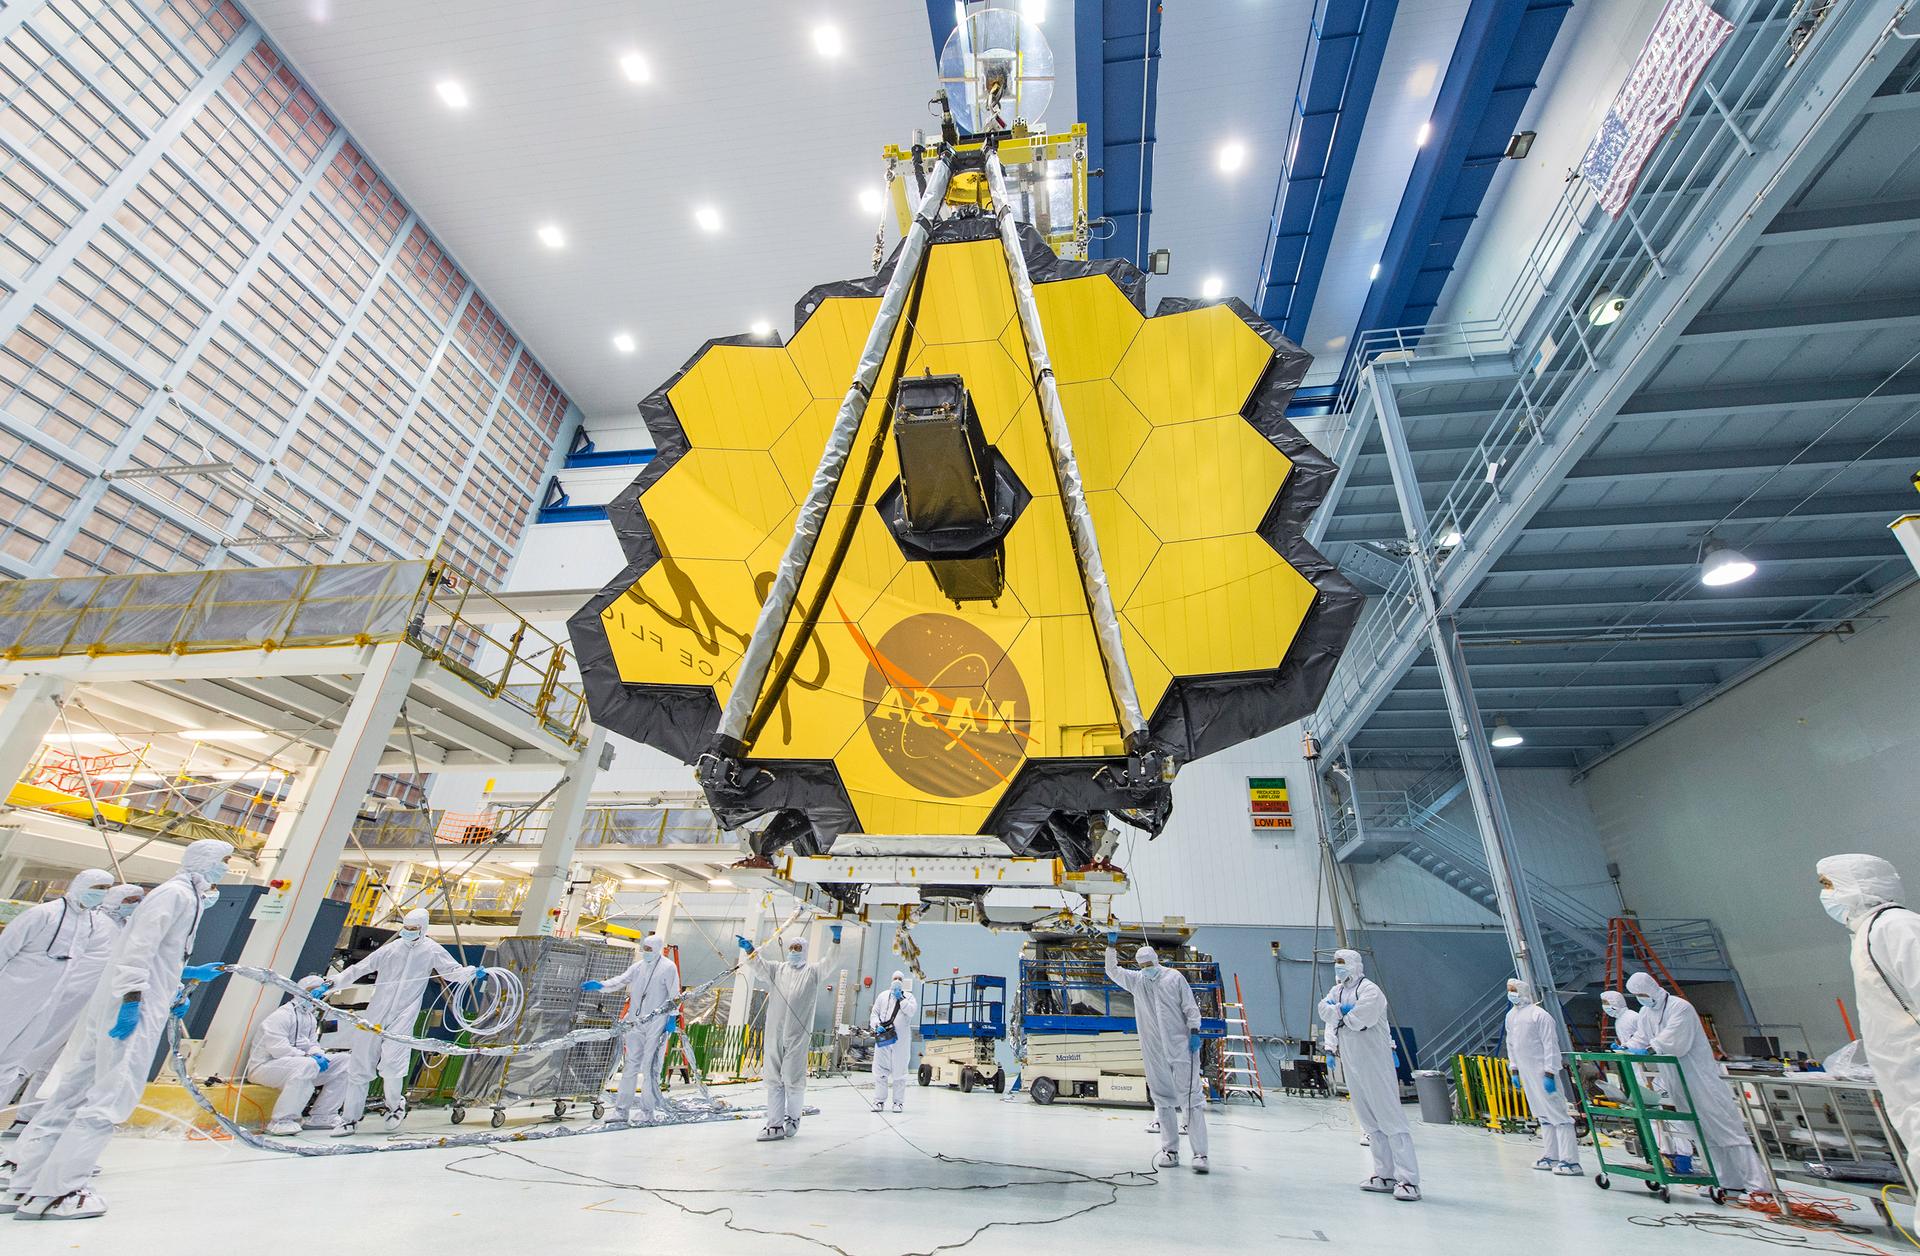 A view of the James Webb Space Telescope